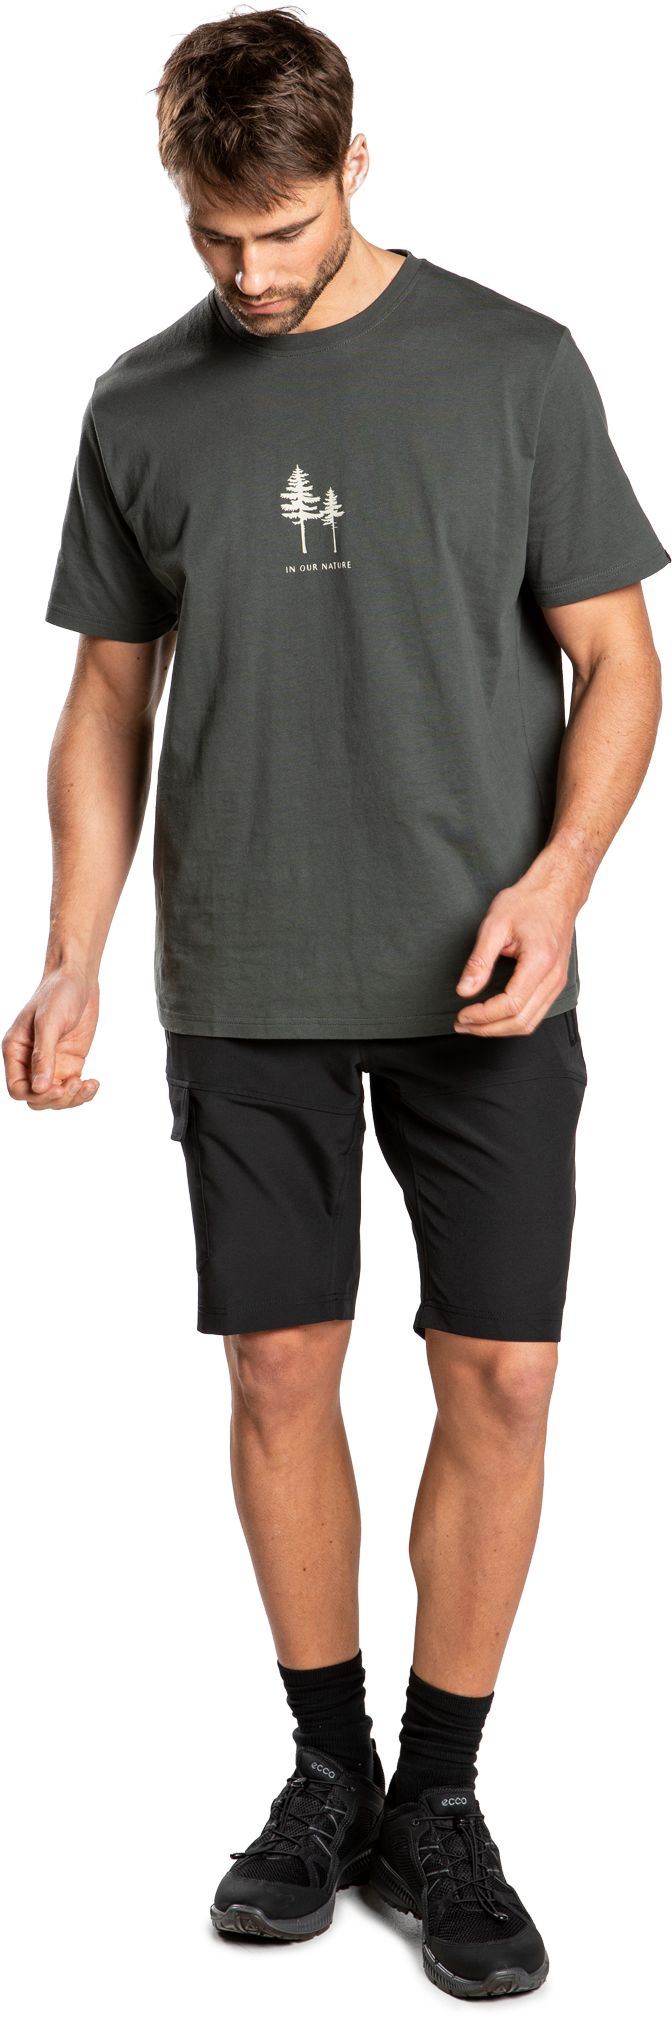 EVEREST, M OUTDOOR SHORTS